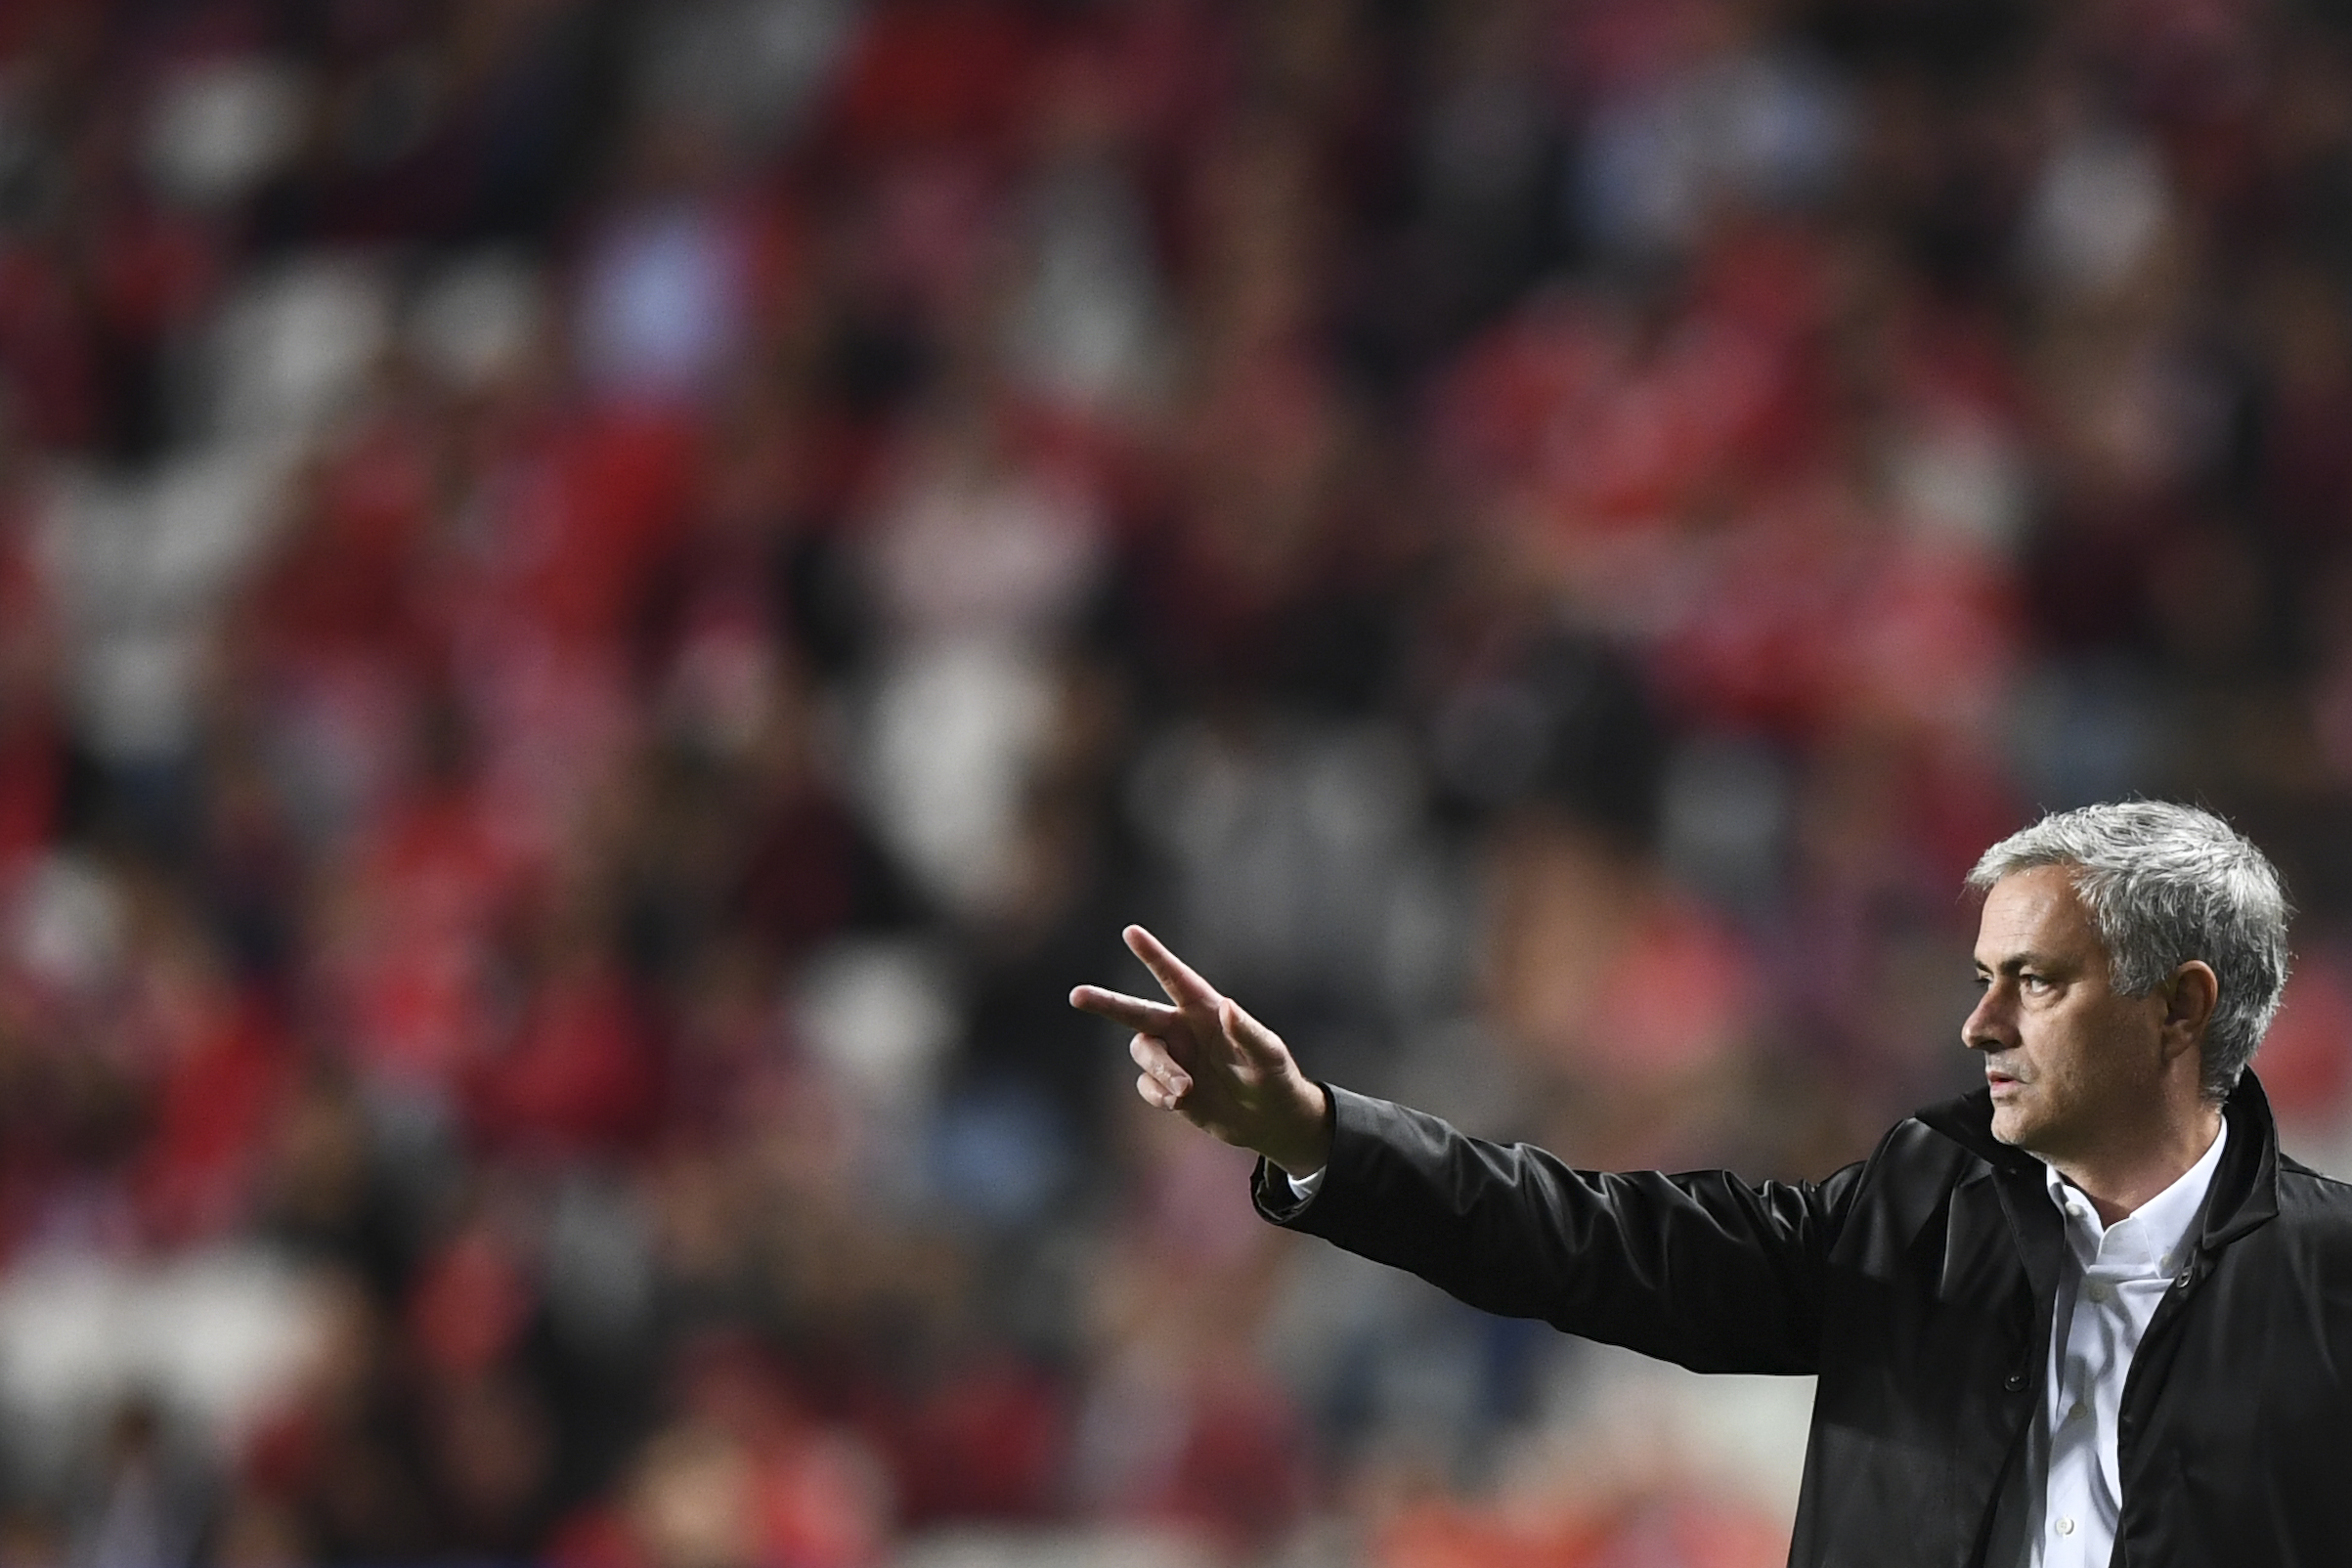 Manchester United's Portuguese manager Jose Mourinho gestures during the UEFA Champions League group A football match SL Benfica vs Manchester United FC at the Luz stadium in Lisbon on Ocotber 18, 2017. / AFP PHOTO / PATRICIA DE MELO MOREIRA        (Photo credit should read PATRICIA DE MELO MOREIRA/AFP/Getty Images)